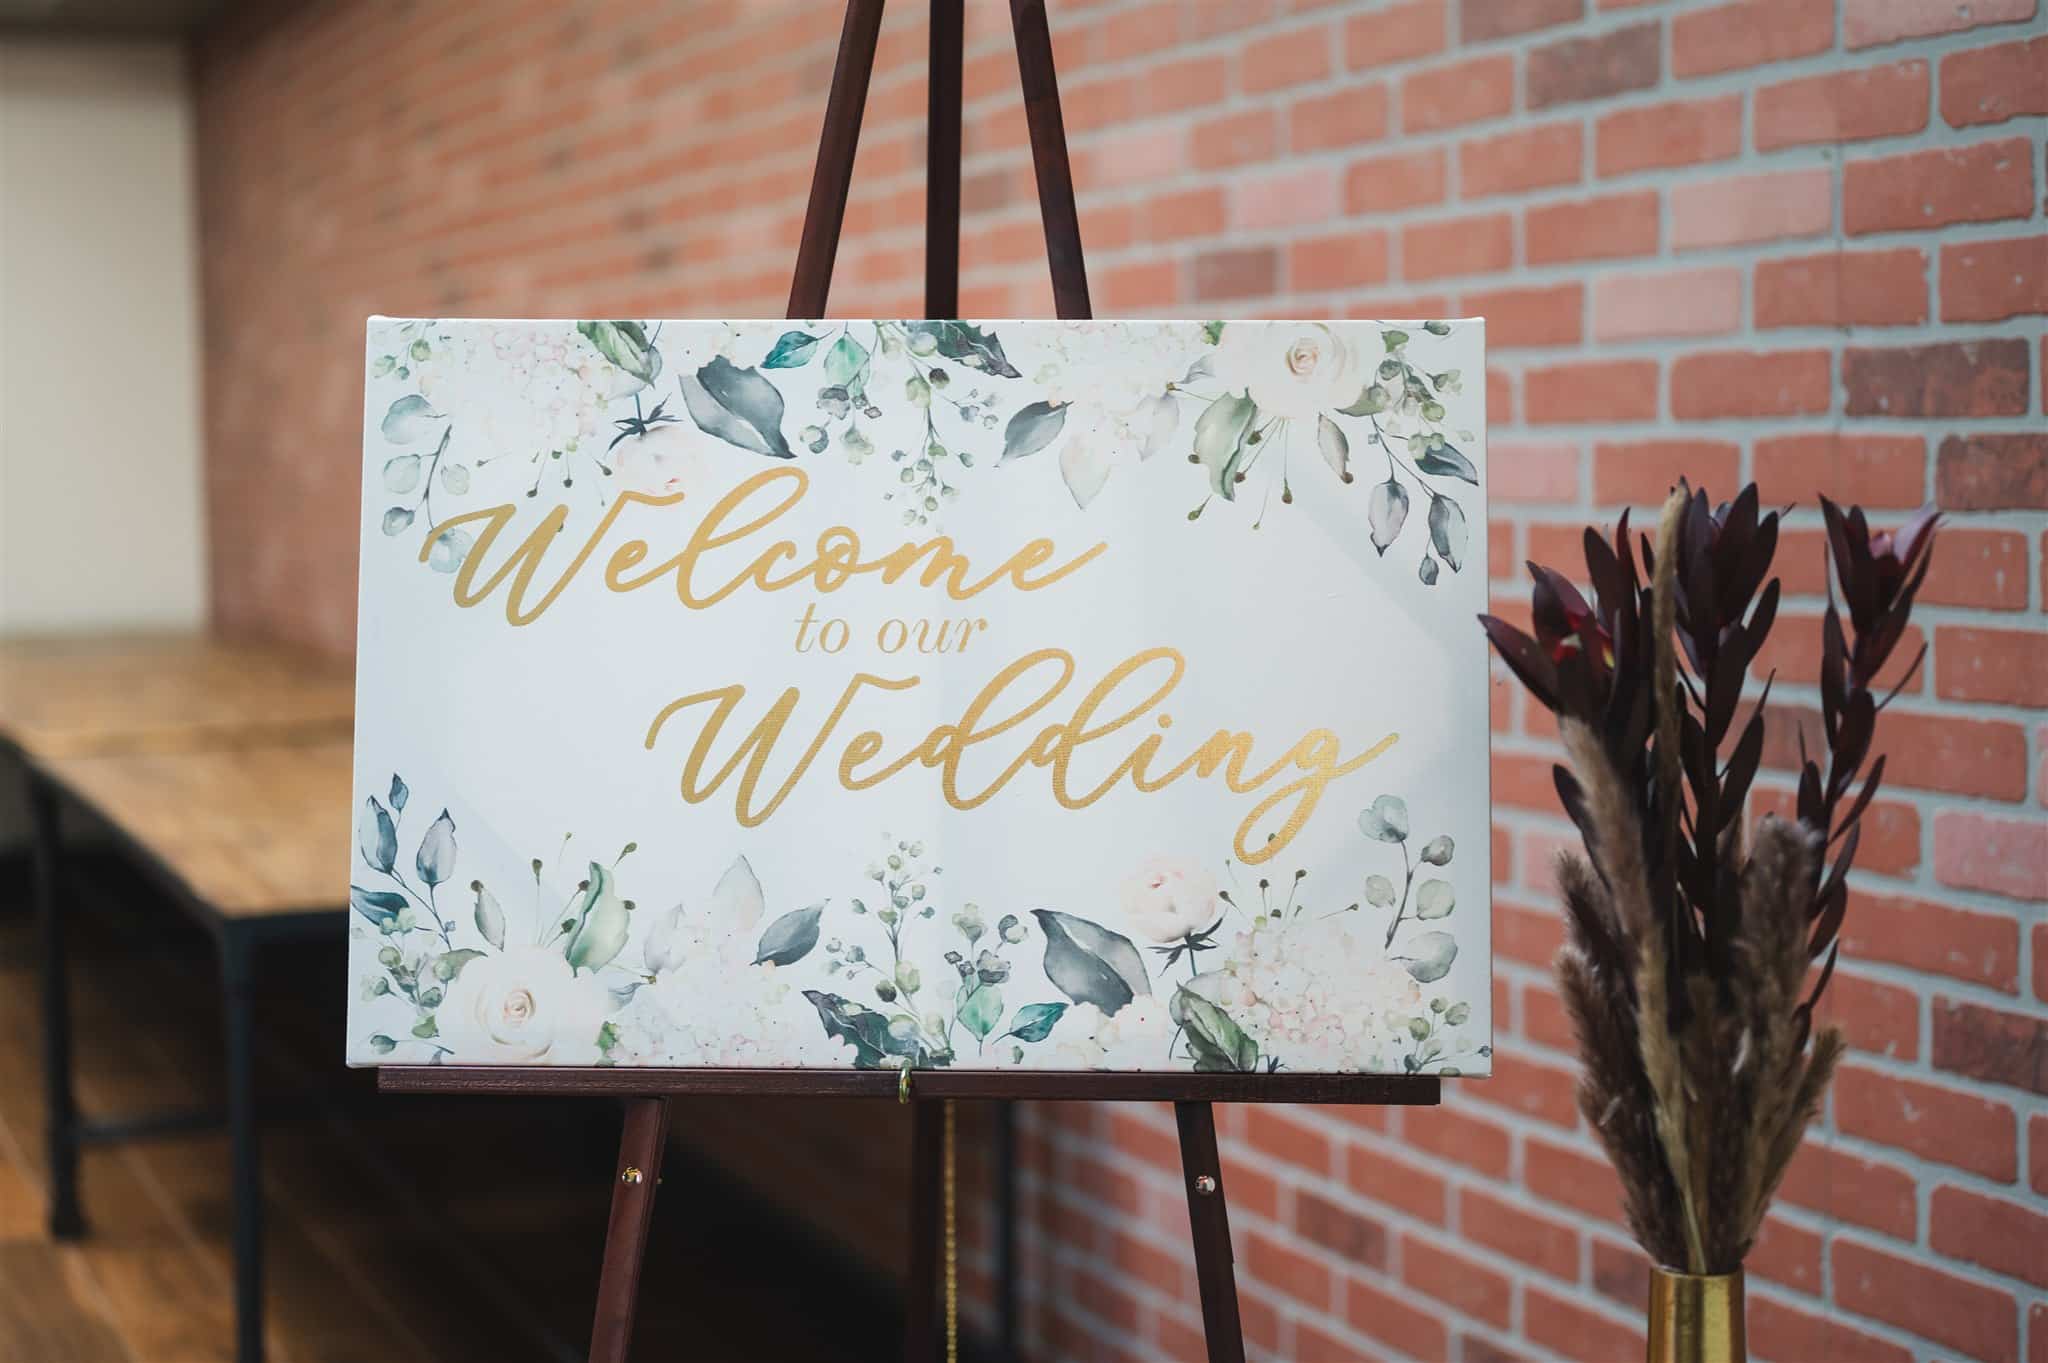 Welcome to our Wedding sign at wedding venue Trellis 925 in Central Florida